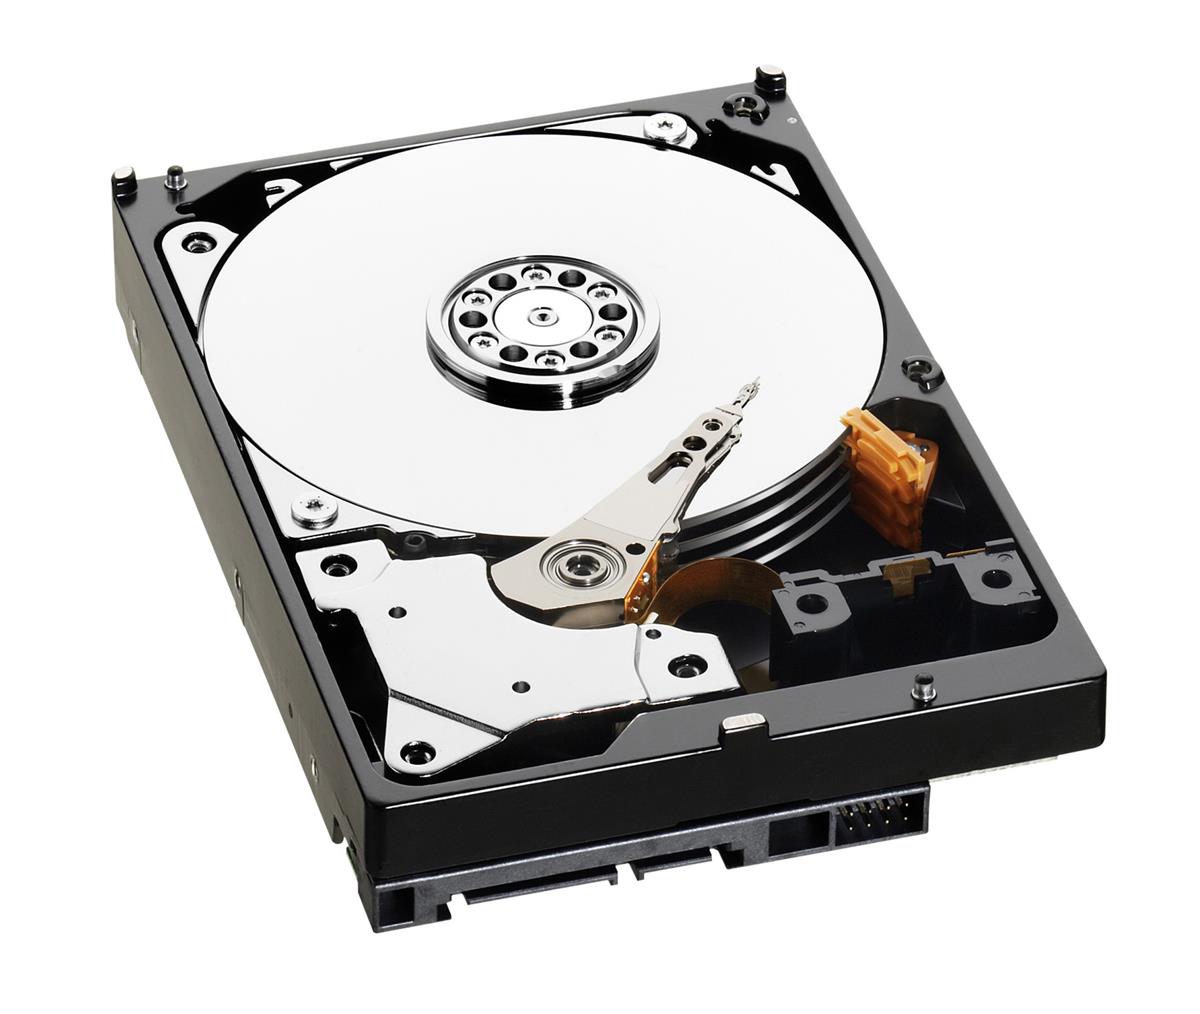 67Y2645-A1 Lenovo 600GB 15000RPM SAS 6Gbps Hot Swap 3.5-inch Internal Hard Drive for ThinkServer